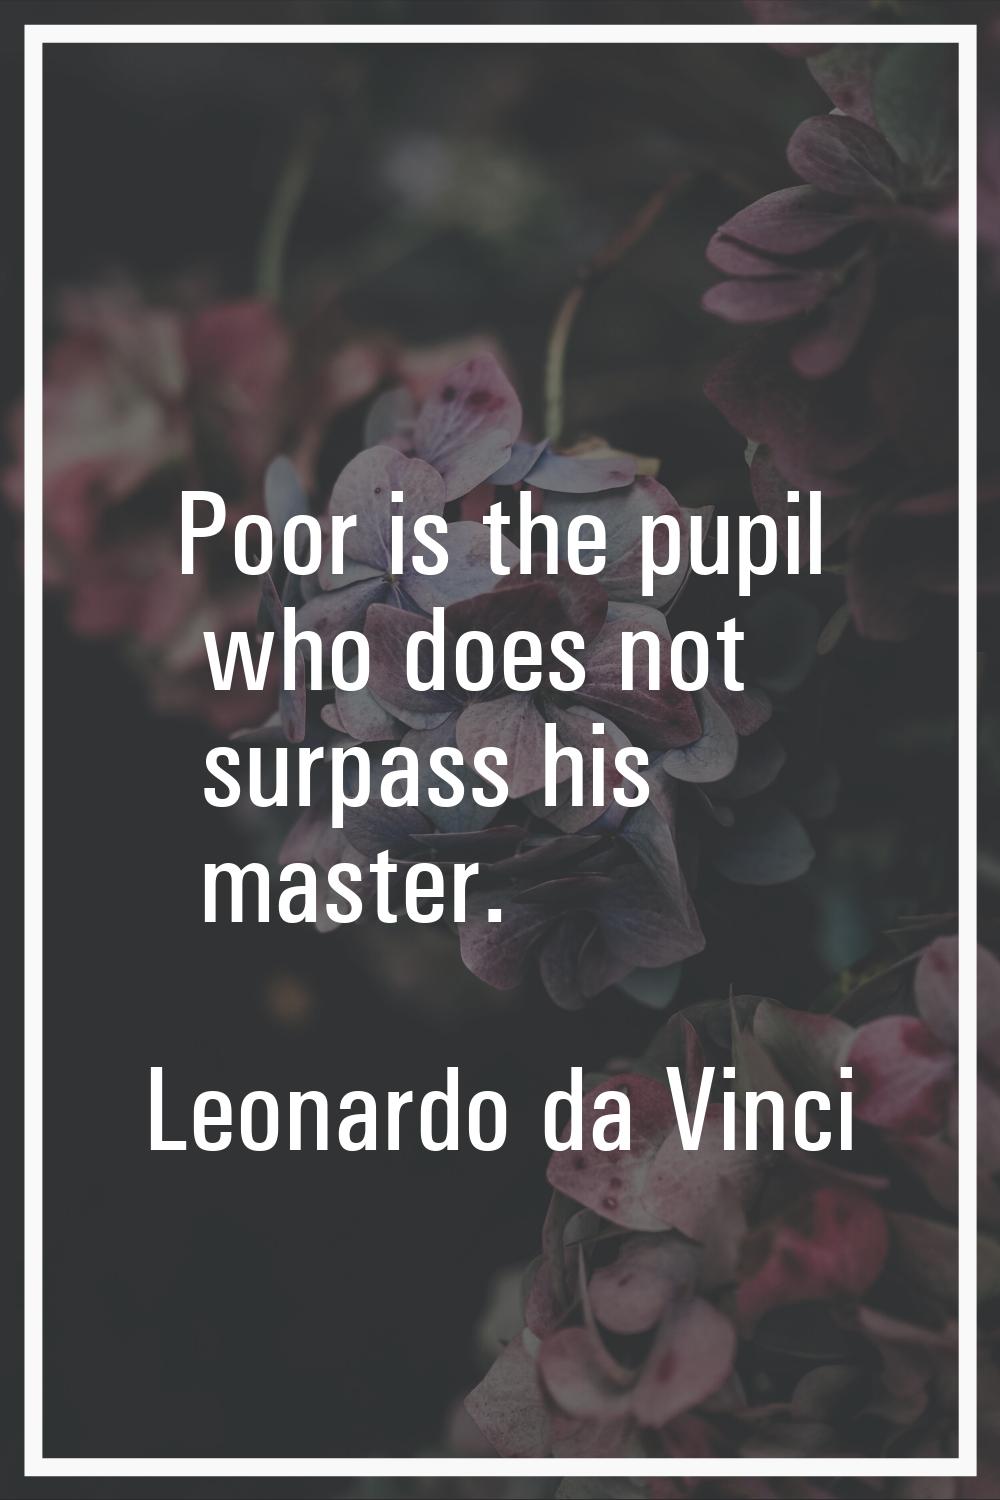 Poor is the pupil who does not surpass his master.